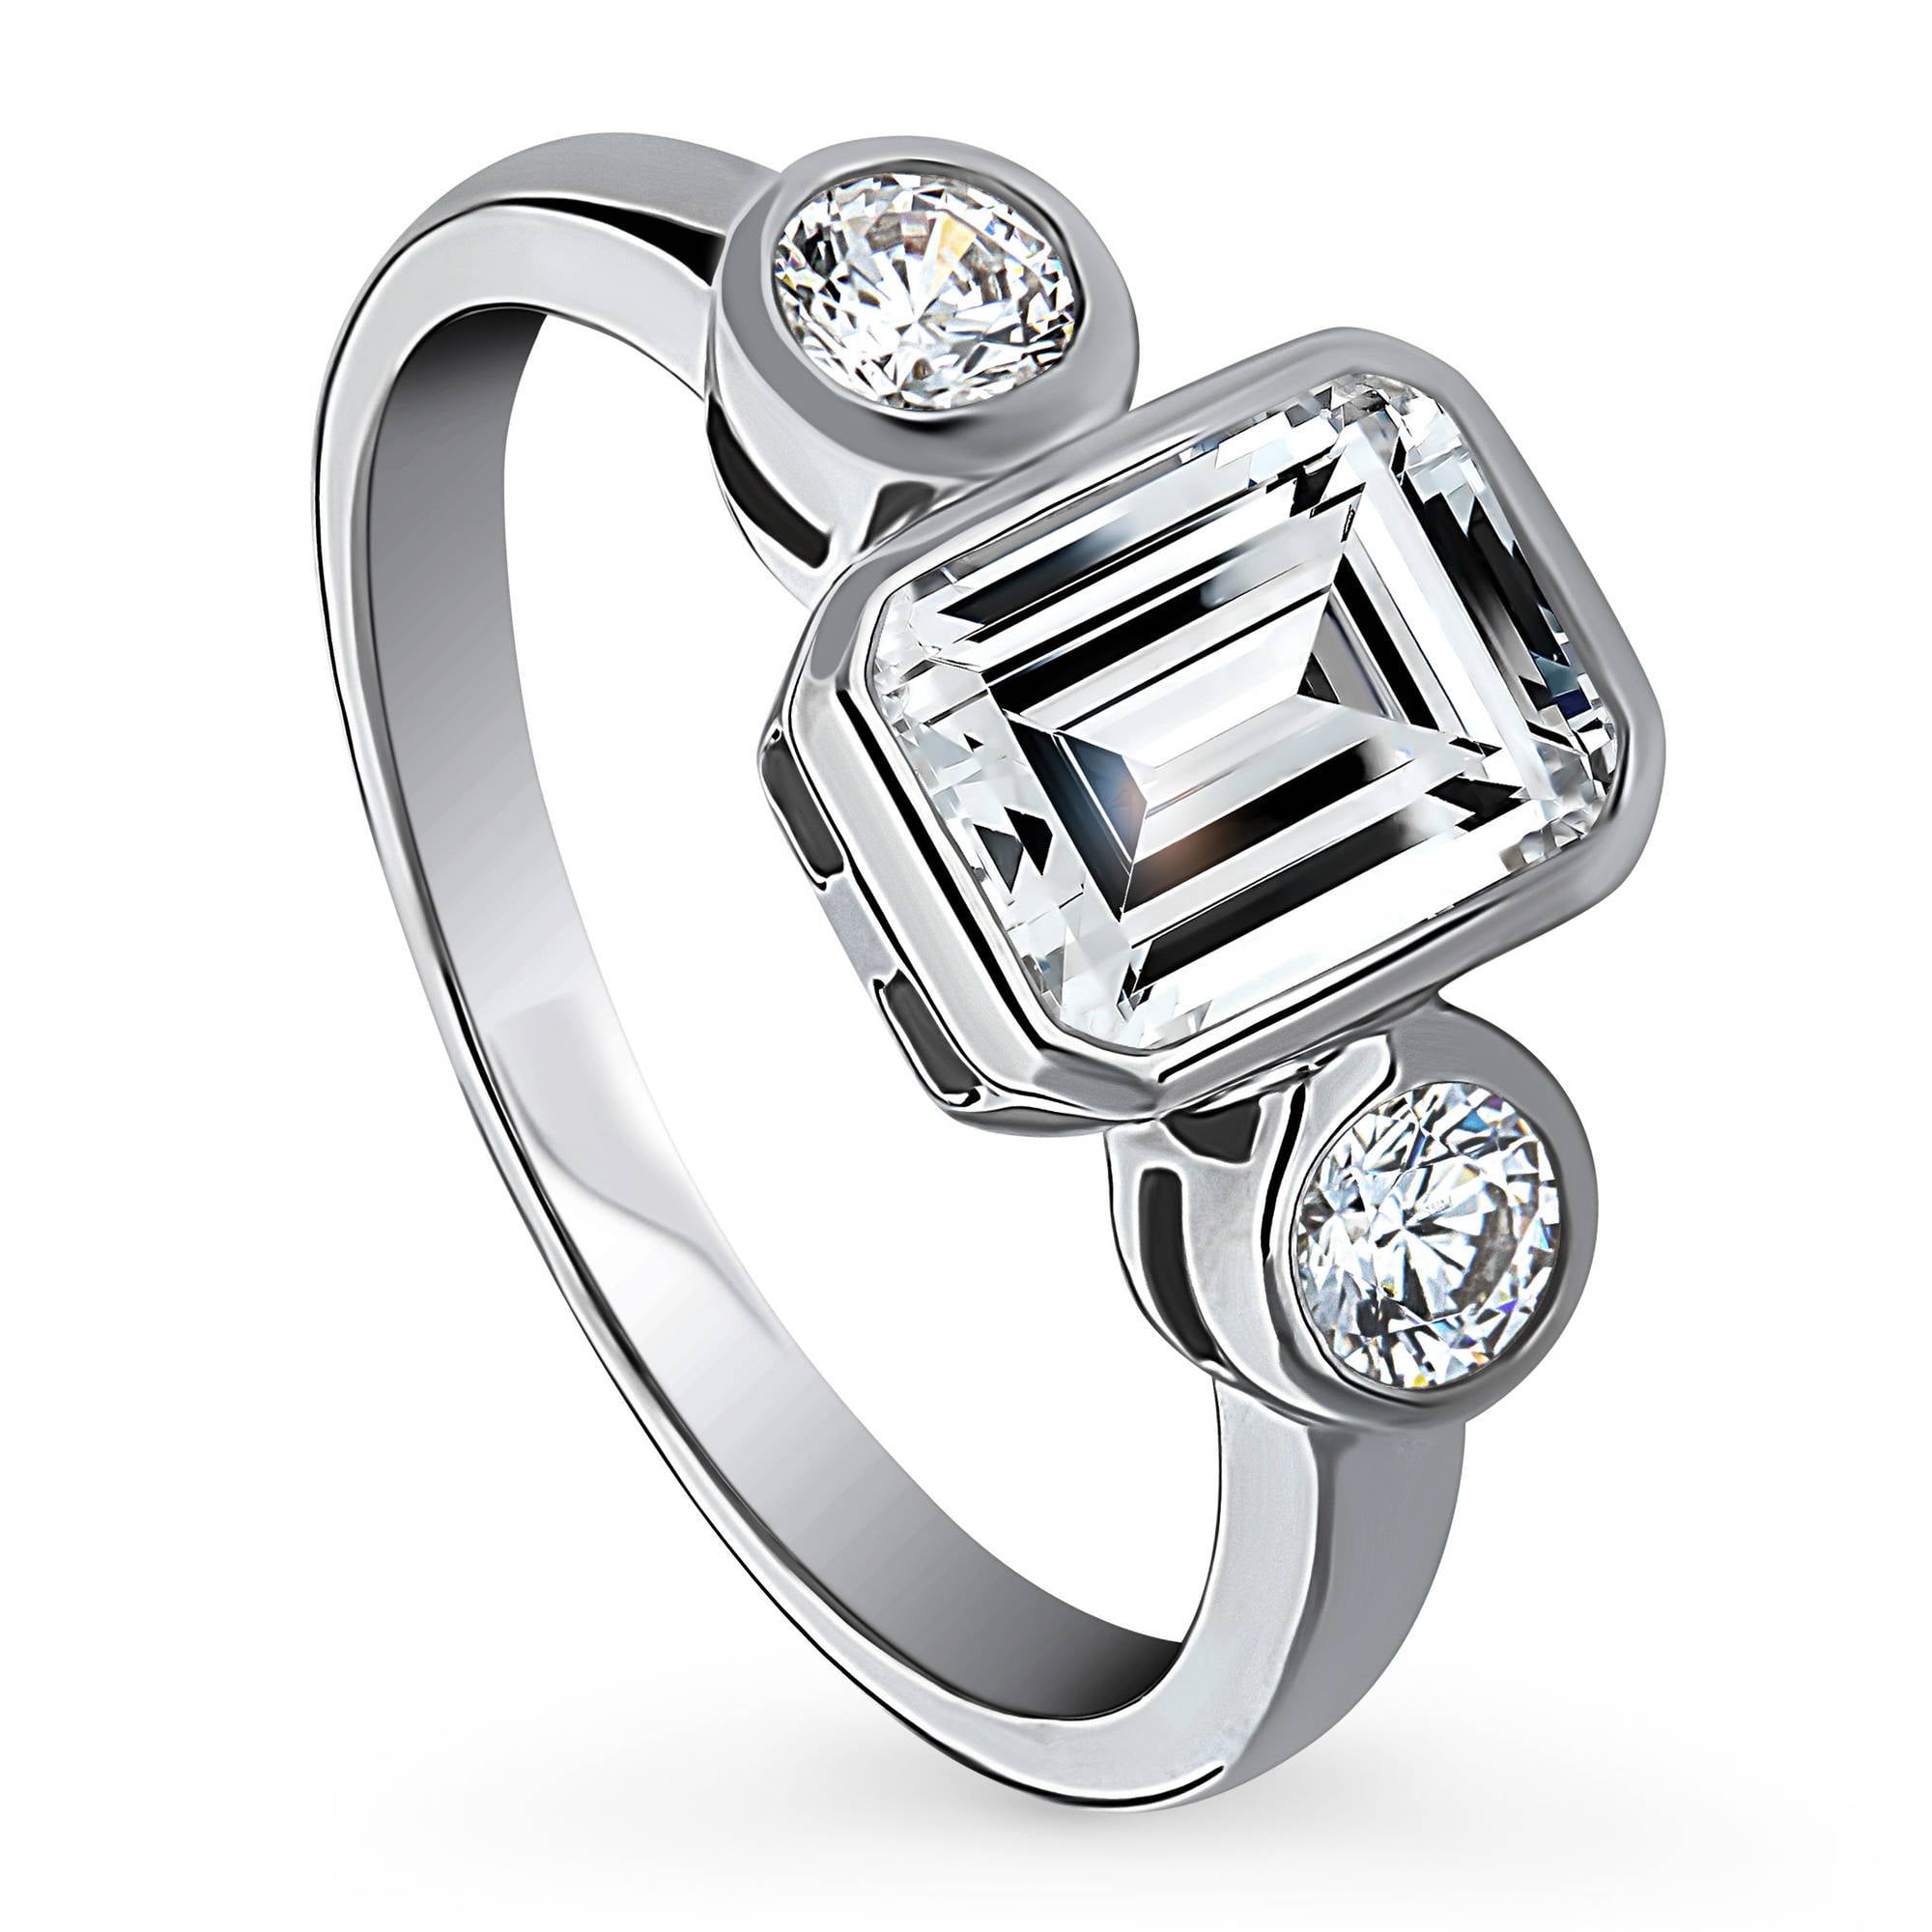 BERRICLE Sterling Silver Emerald Cut CZ 3-Stone Anniversary Engagement Ring 